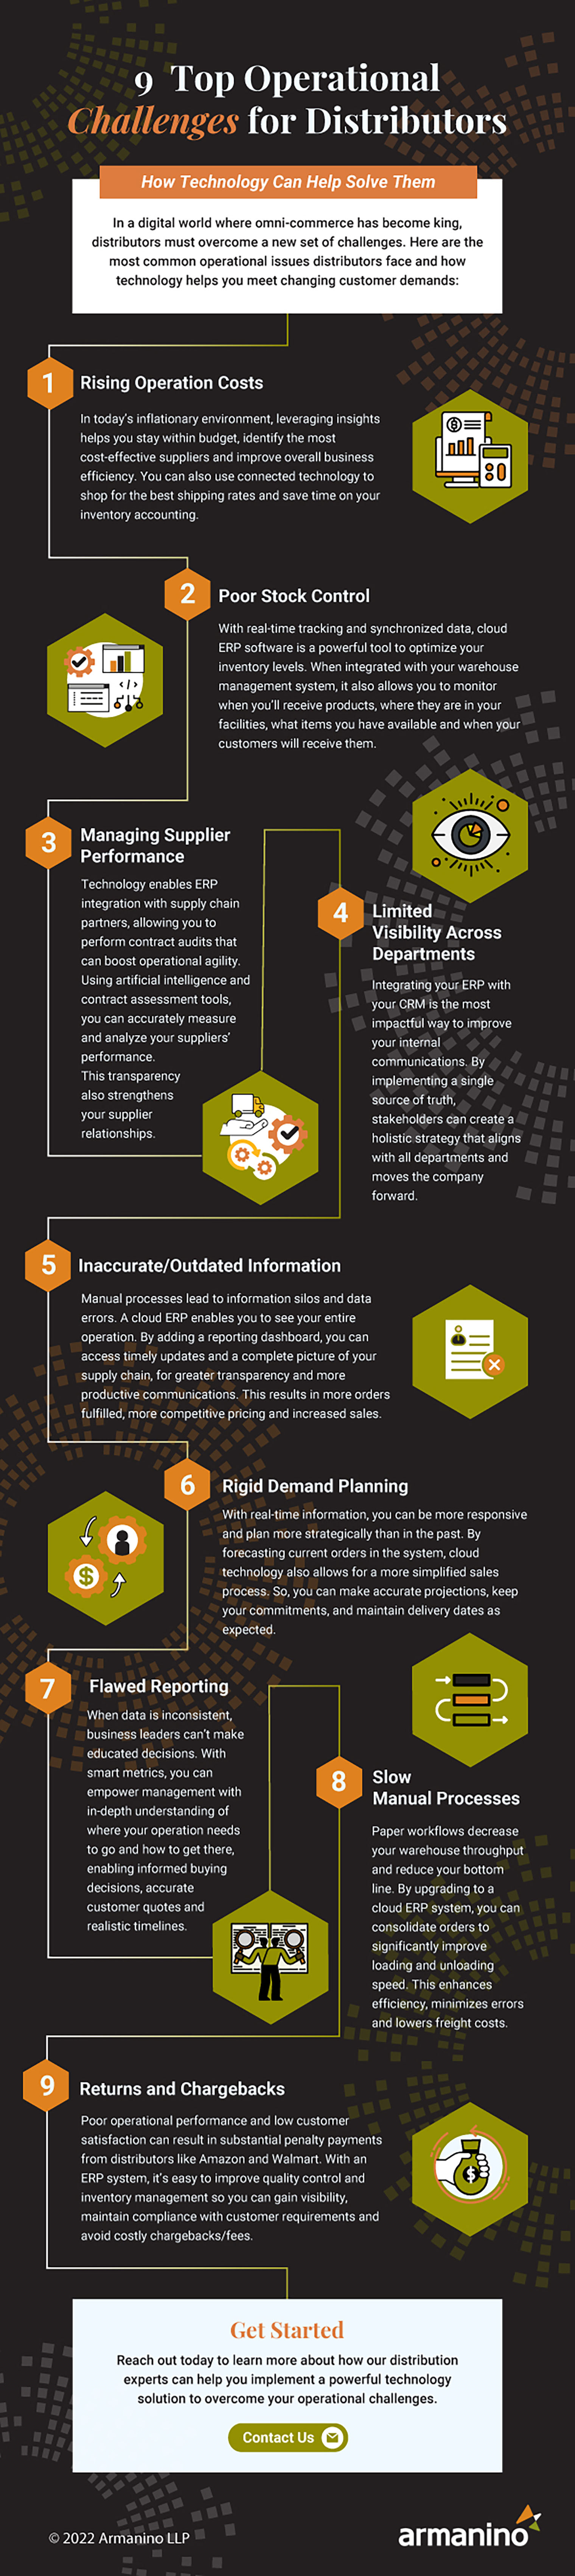 9 Top Operational Challenges for Distributors Infographic